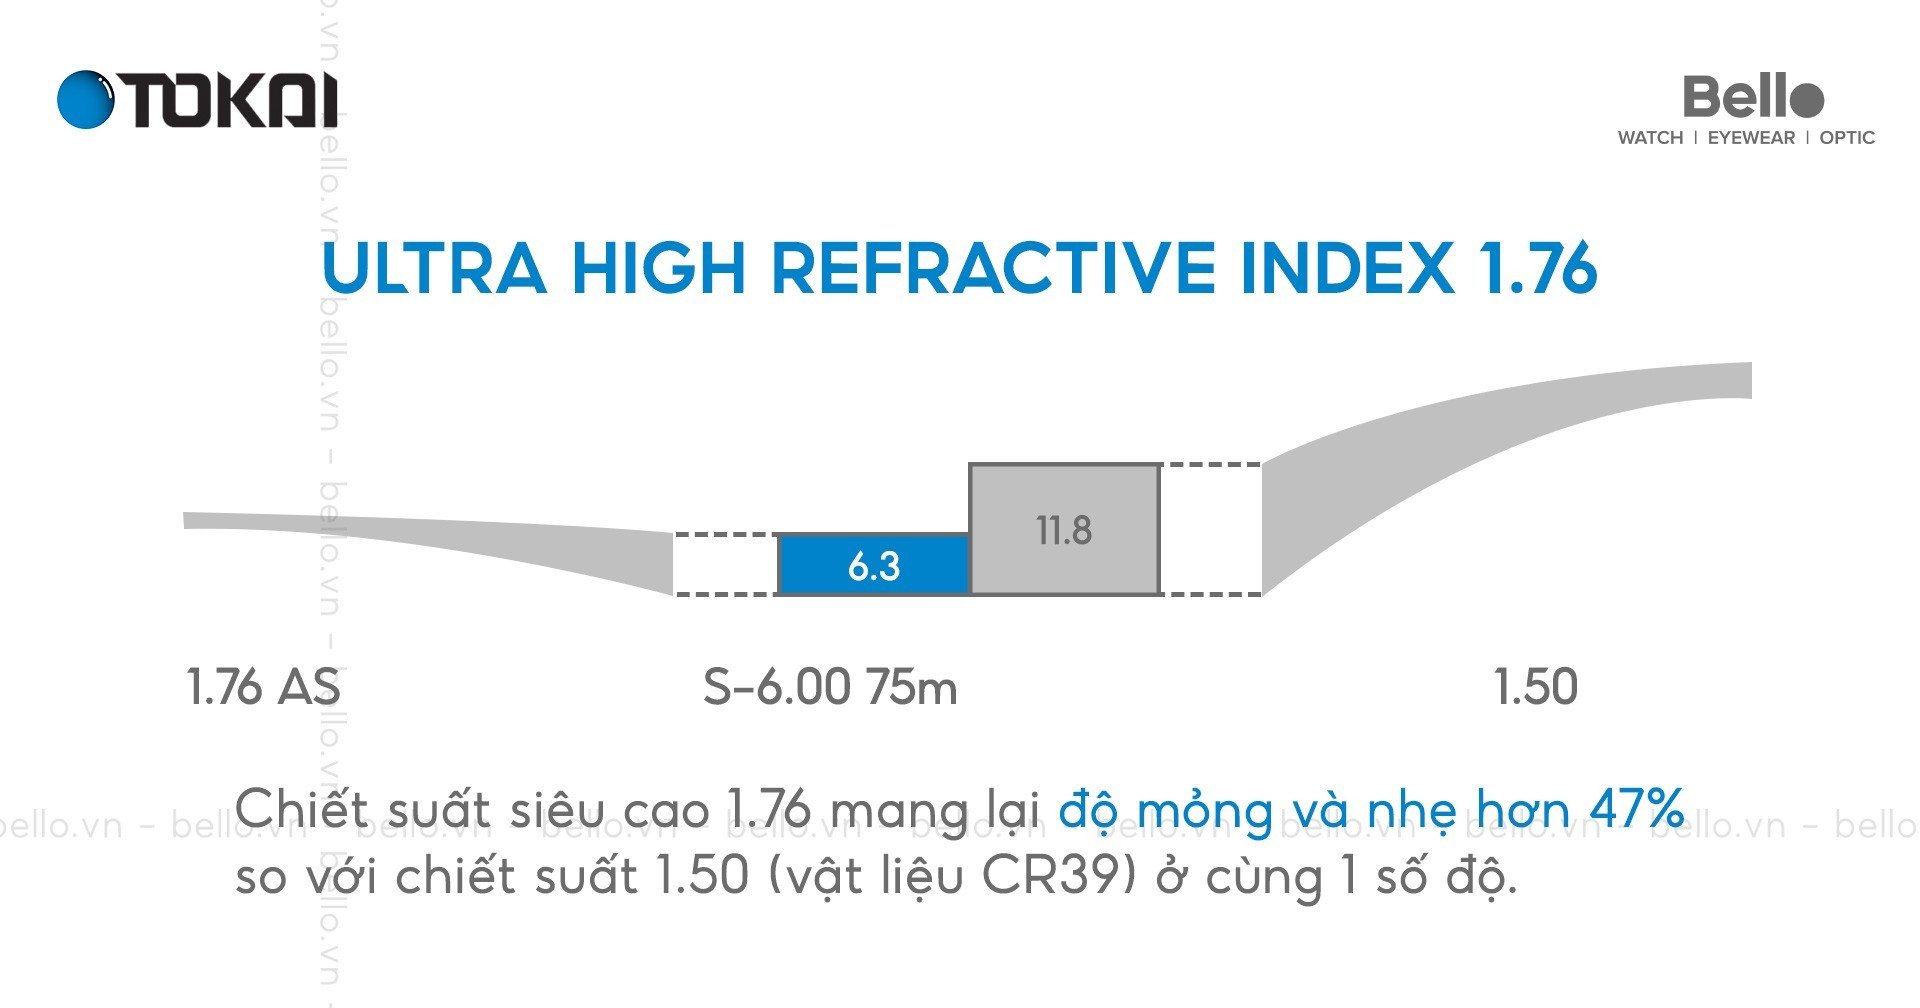 Ultra high refractive index 1.76, chiết suất siêu cao 1.76